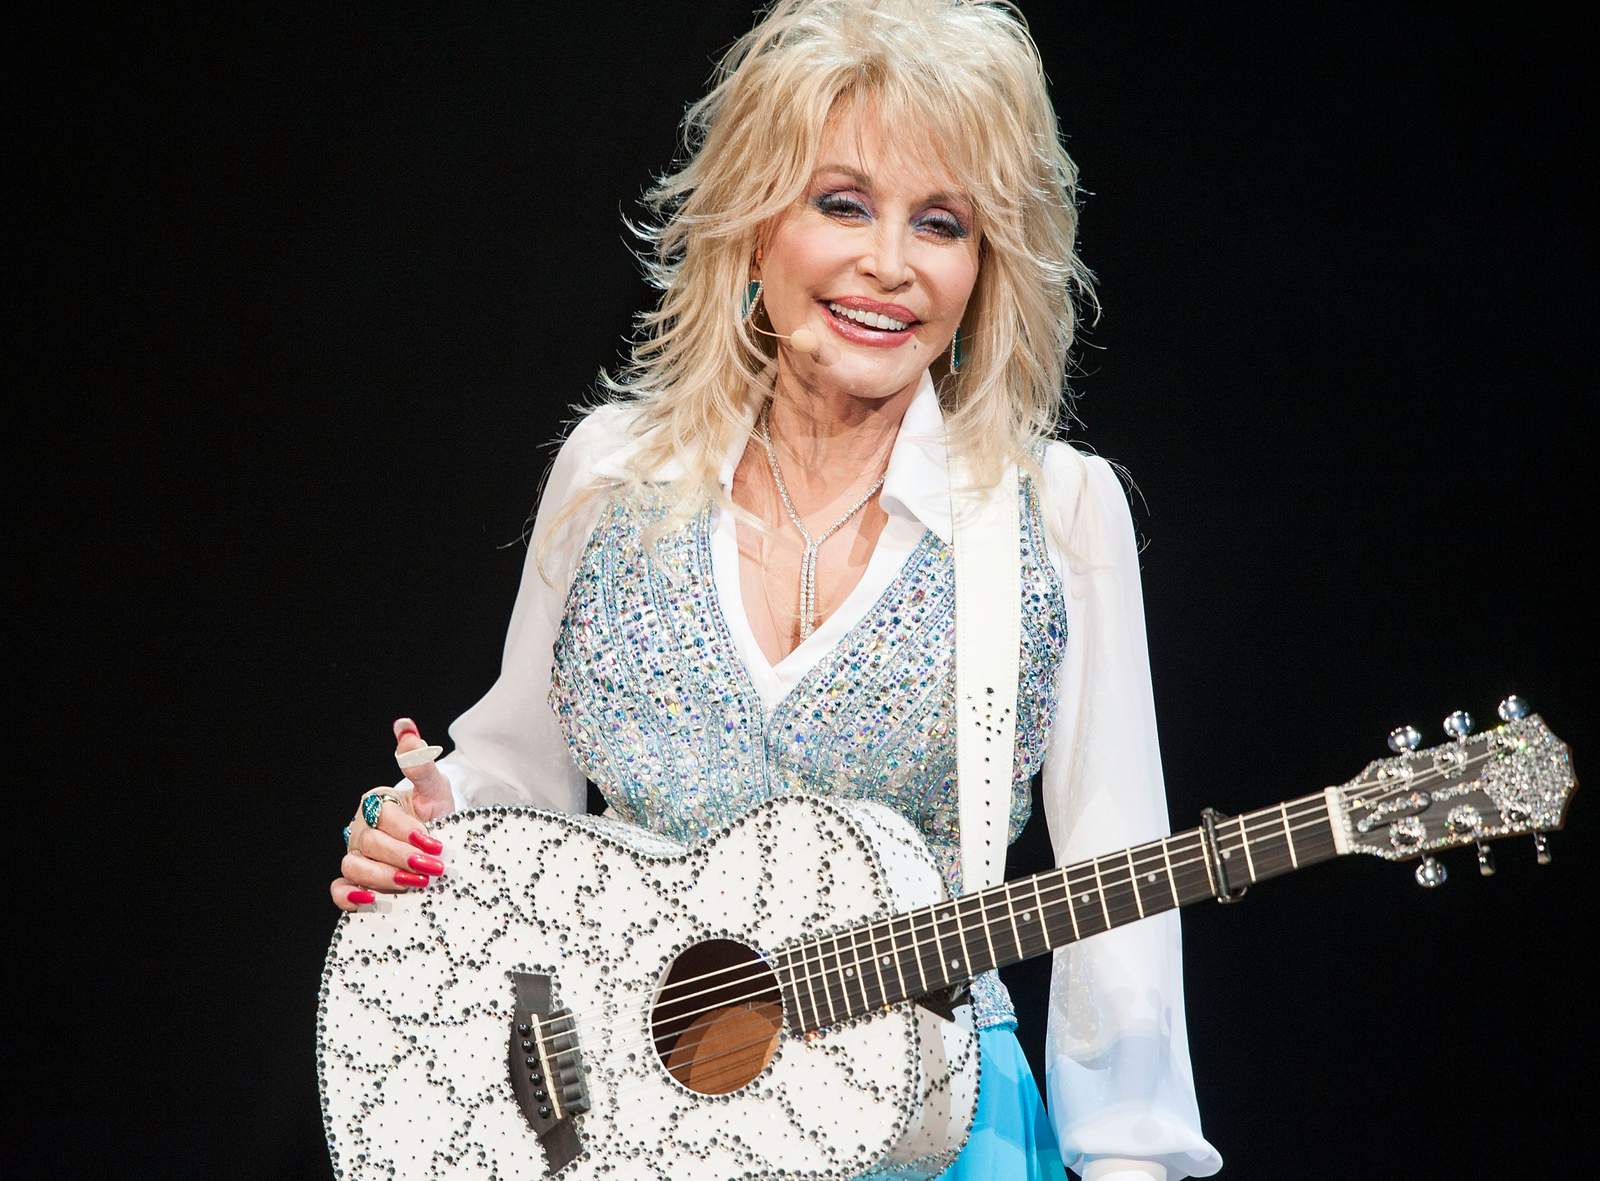 Dolly Parton helped fund Moderna’s COVID-19 vaccine research